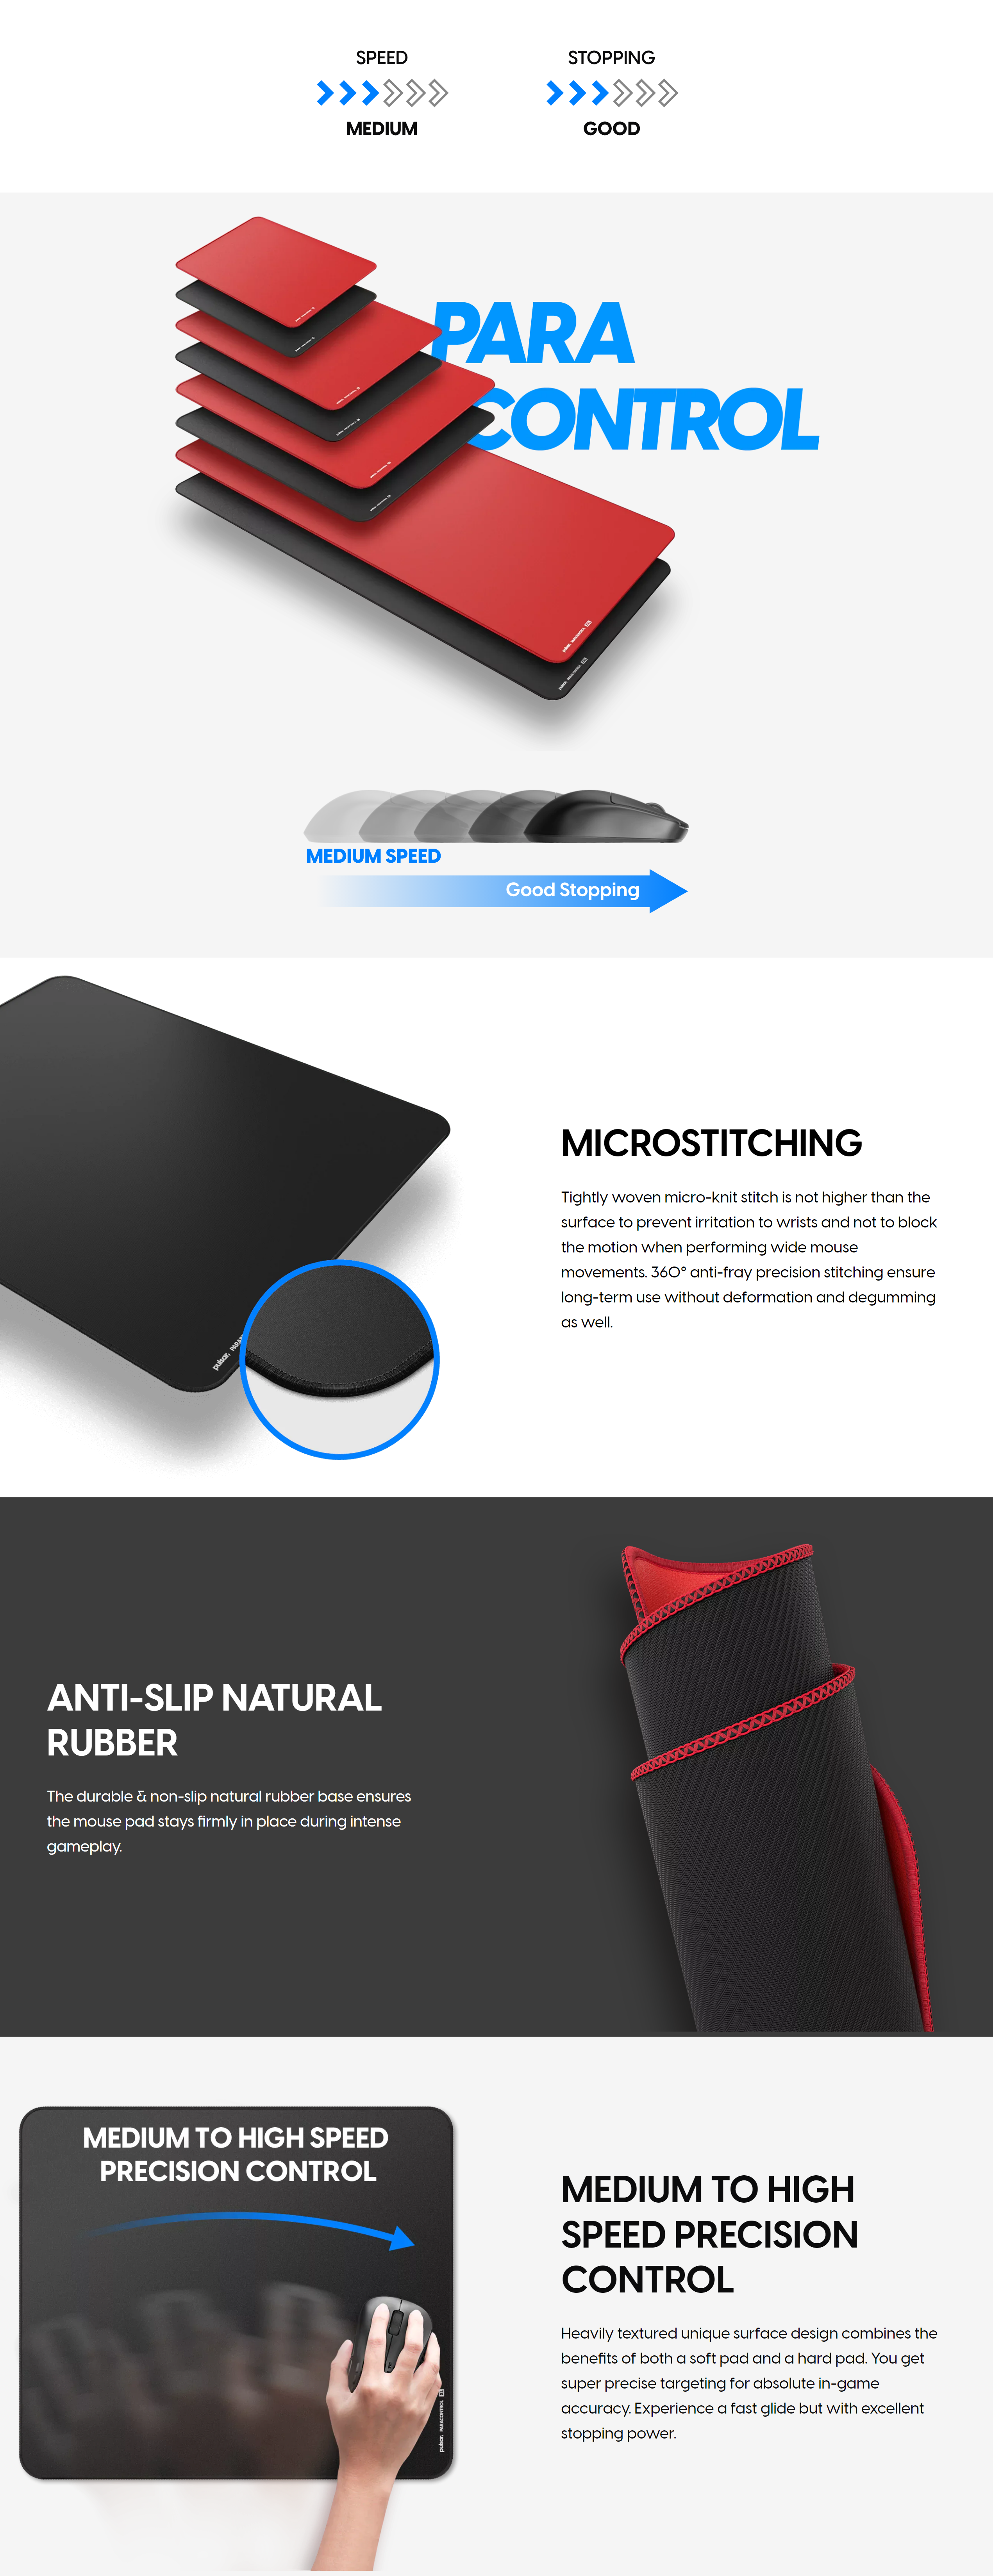 A large marketing image providing additional information about the product Pulsar Paracontrol V2 Mousepad XXL - RedV - Additional alt info not provided